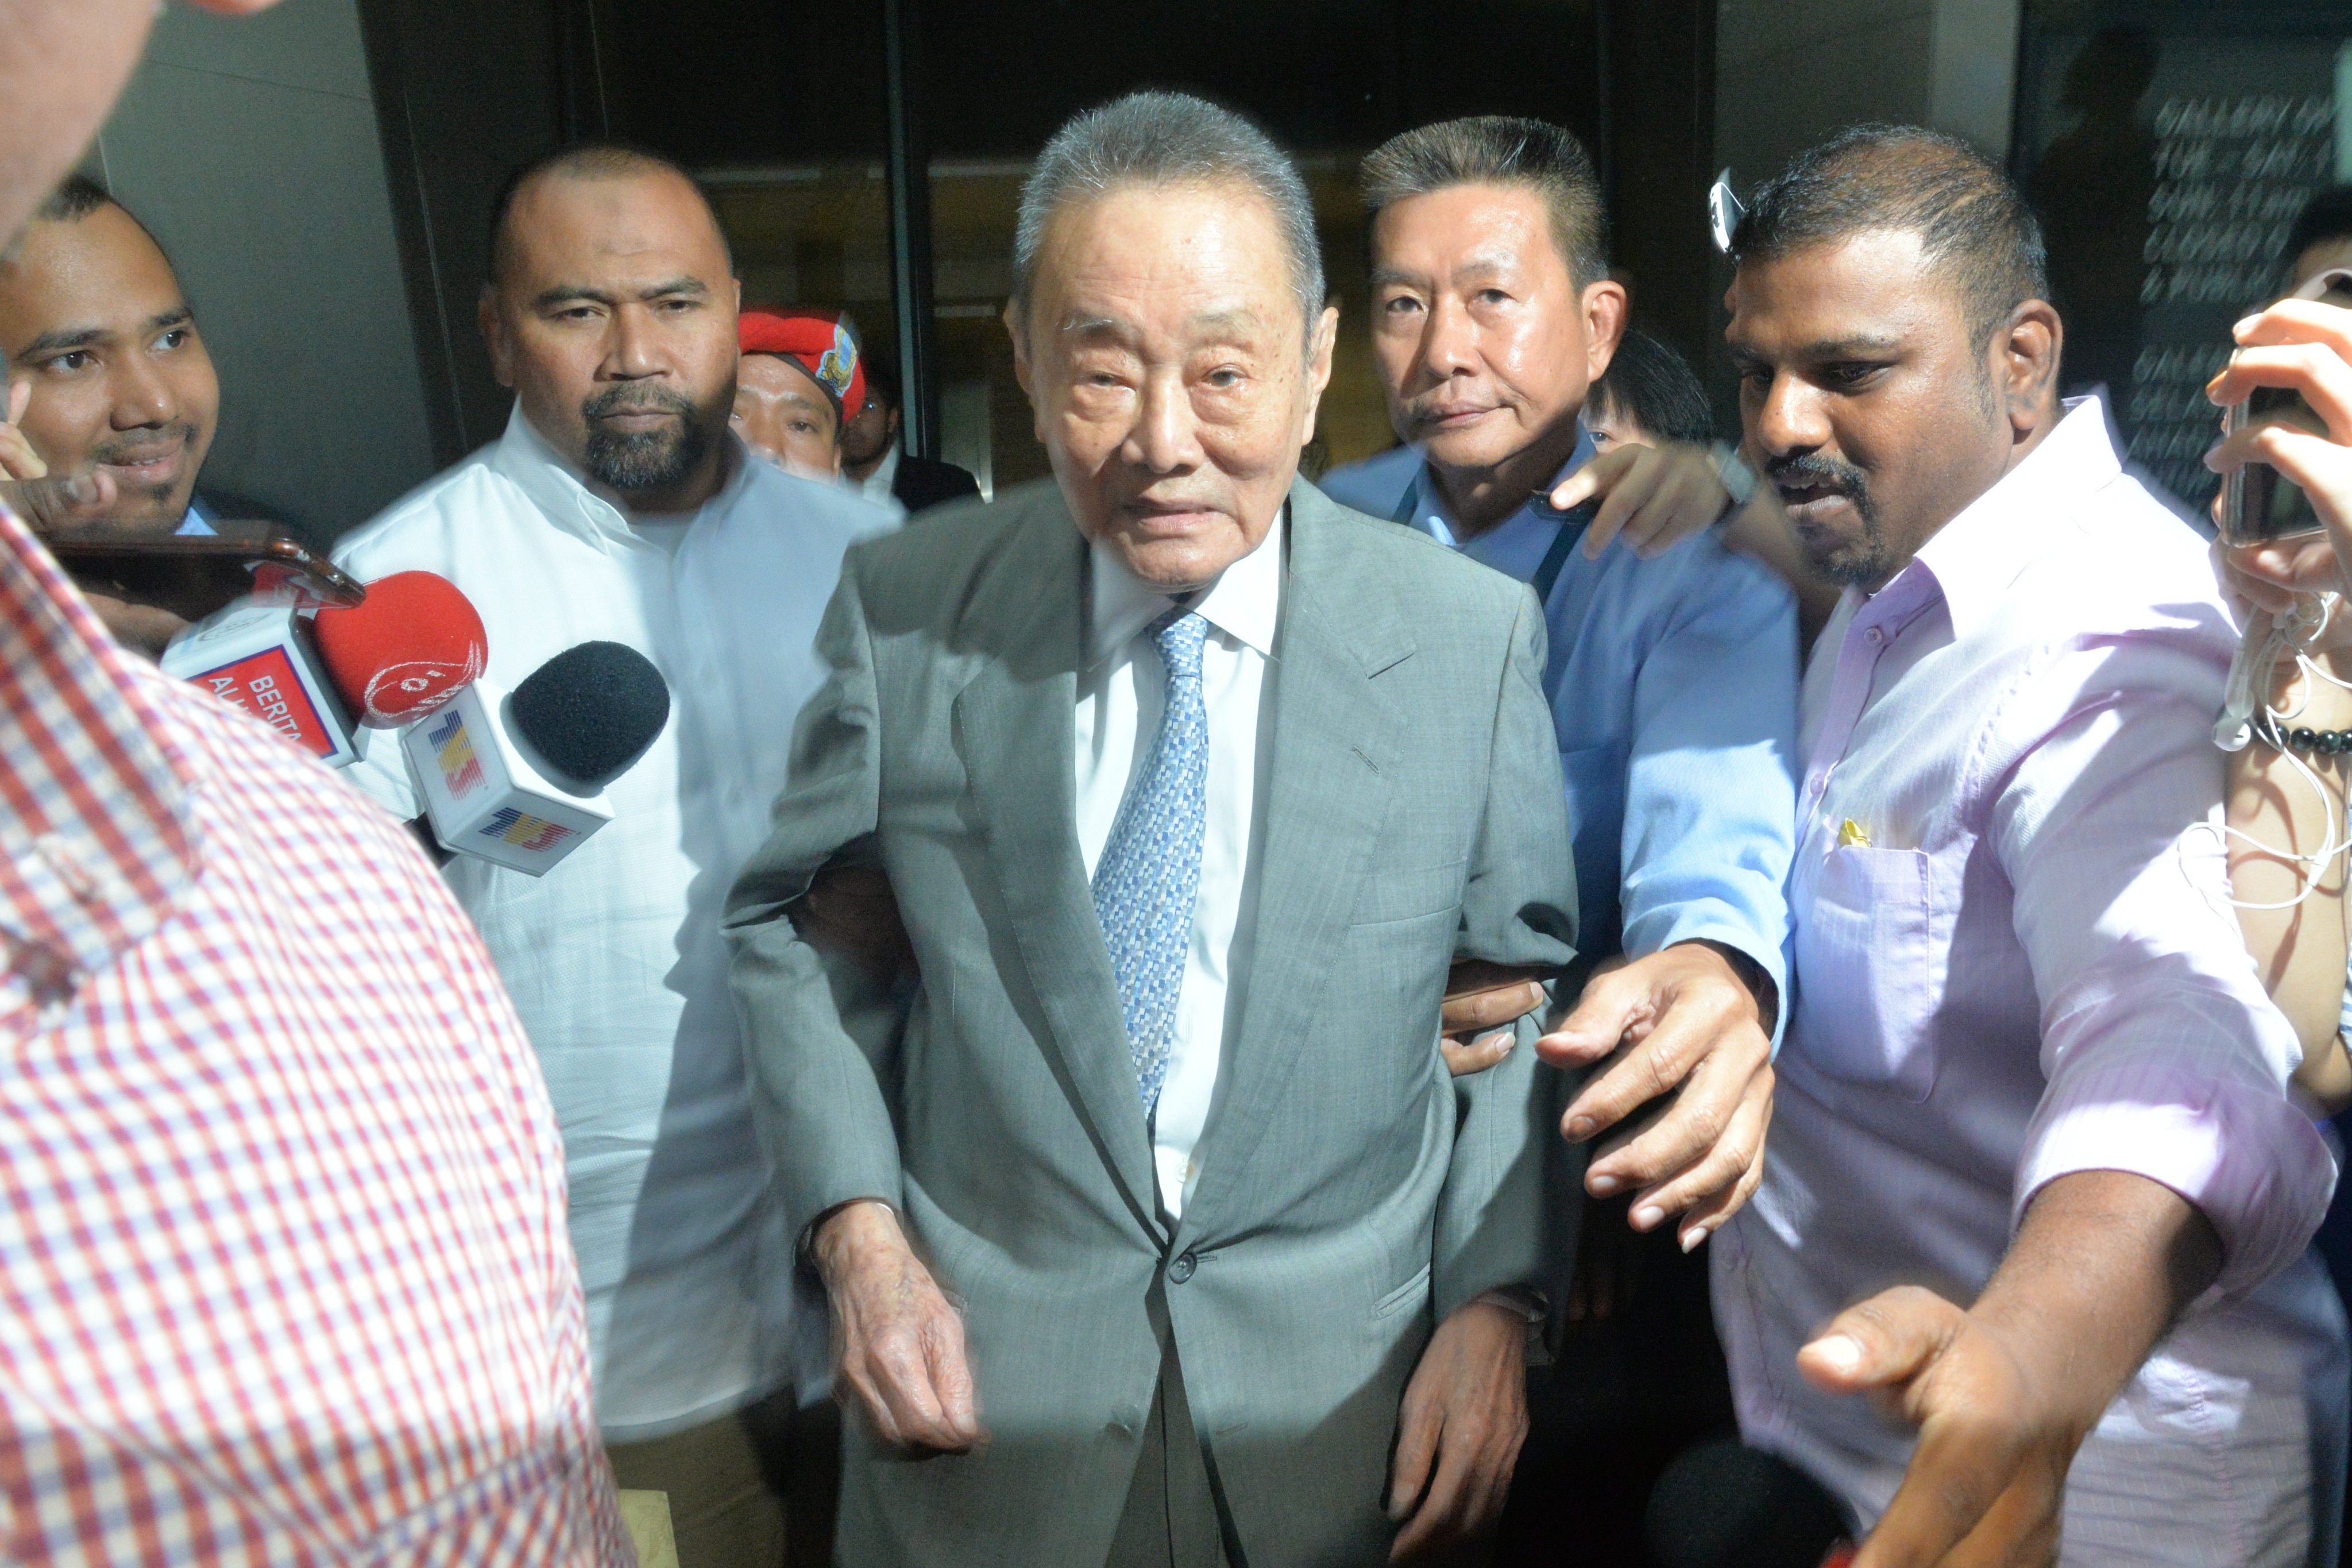 (180522) -- KUALA LUMPUR, May 22, 2018 (Xinhua) -- Malaysian tycoon Robert Kuok (C) leaves after attending a Council of Eminent Persons meeting in Kuala Lumpur, Malaysia, May 22, 2018. Malaysian tycoon Robert Kuok attended an advisory council meeting on Tuesday, saying that he hopes that all Malaysians would be taken care of under the new government. Kuok is one of the council members which was tasked by Prime Minister Mahathir Mohamad to advice on the country’s economic and financial matters following Mahathir’s electoral victory on May 9. (Xinhua/Zhu Wei)(srb)